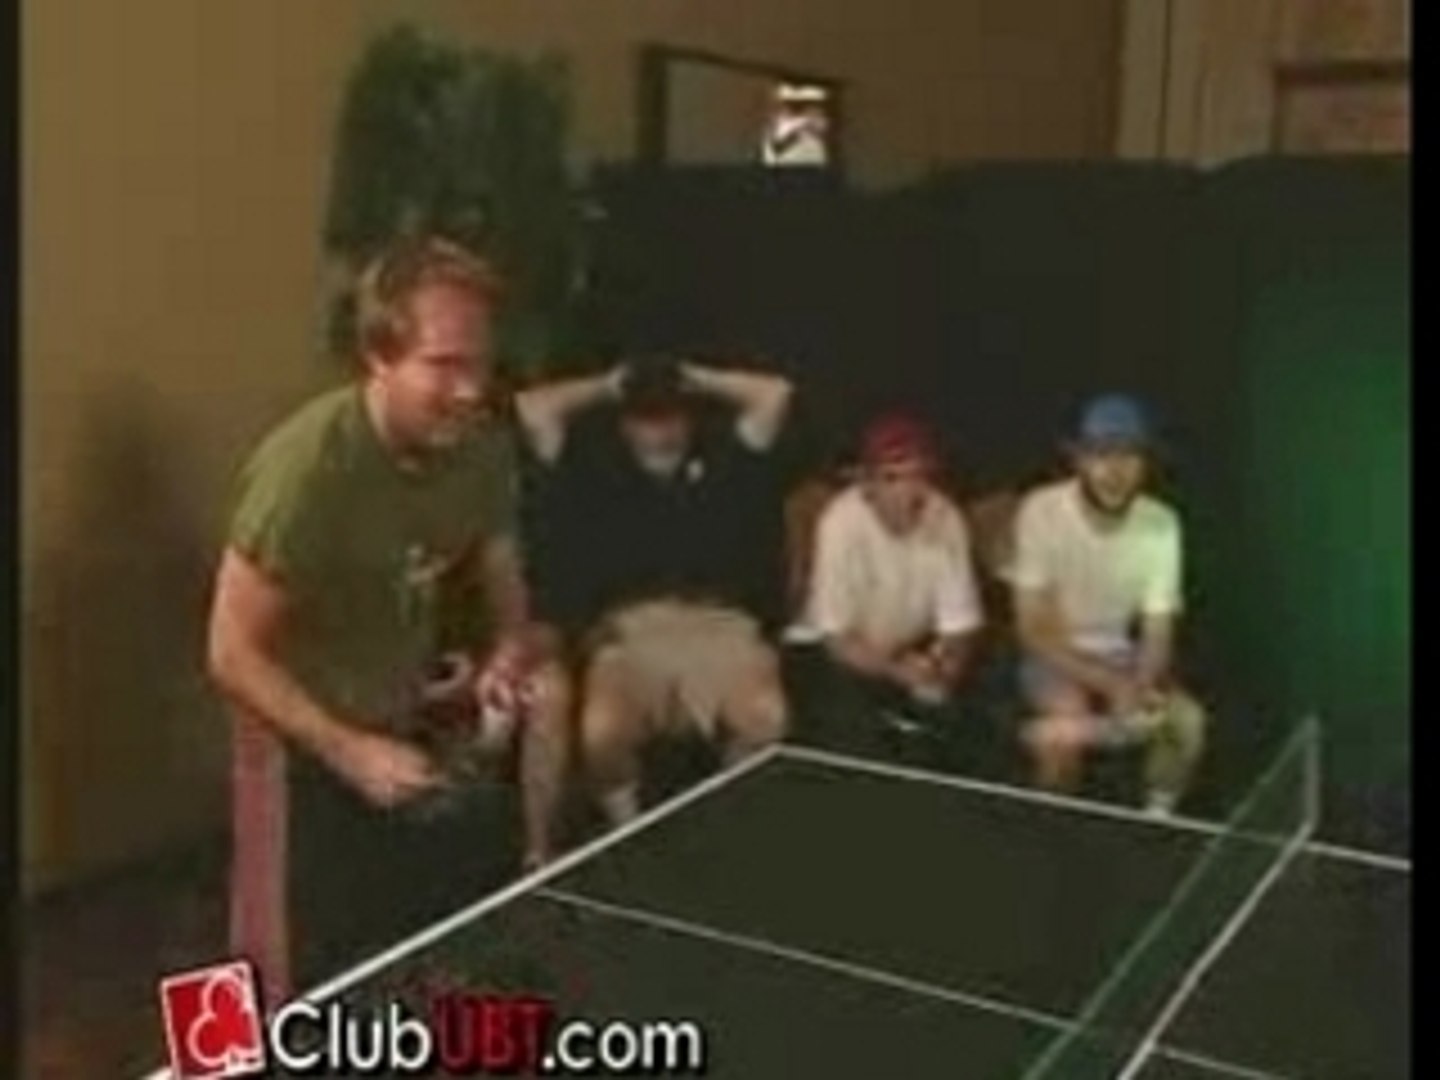 The man with $100,000 boobs plays ping pong for money. - video Dailymotion